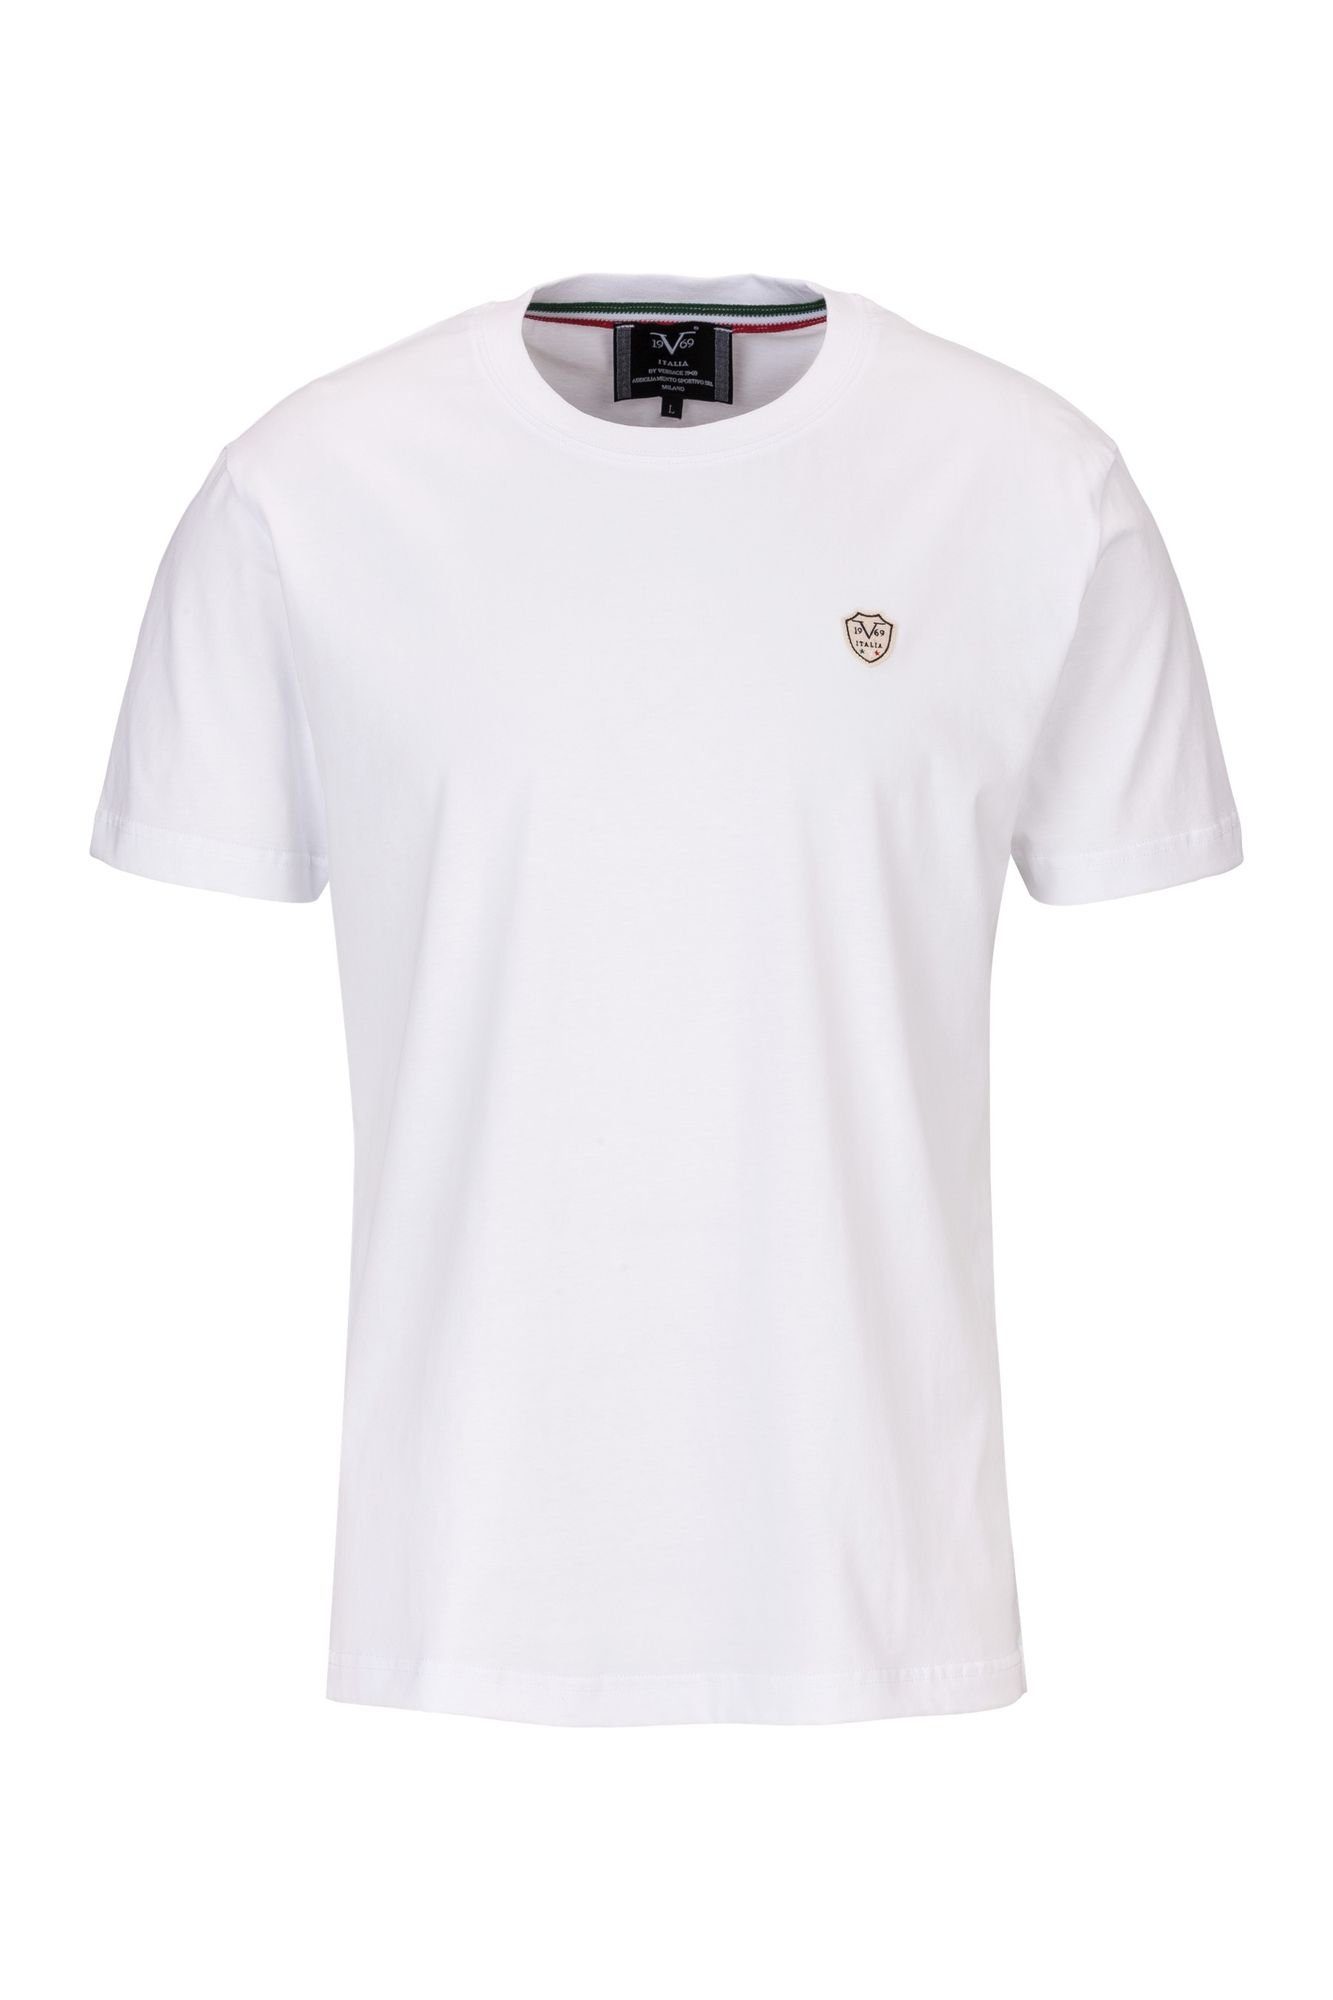 19V69 Italia by Versace T-Shirt Injection WHITE